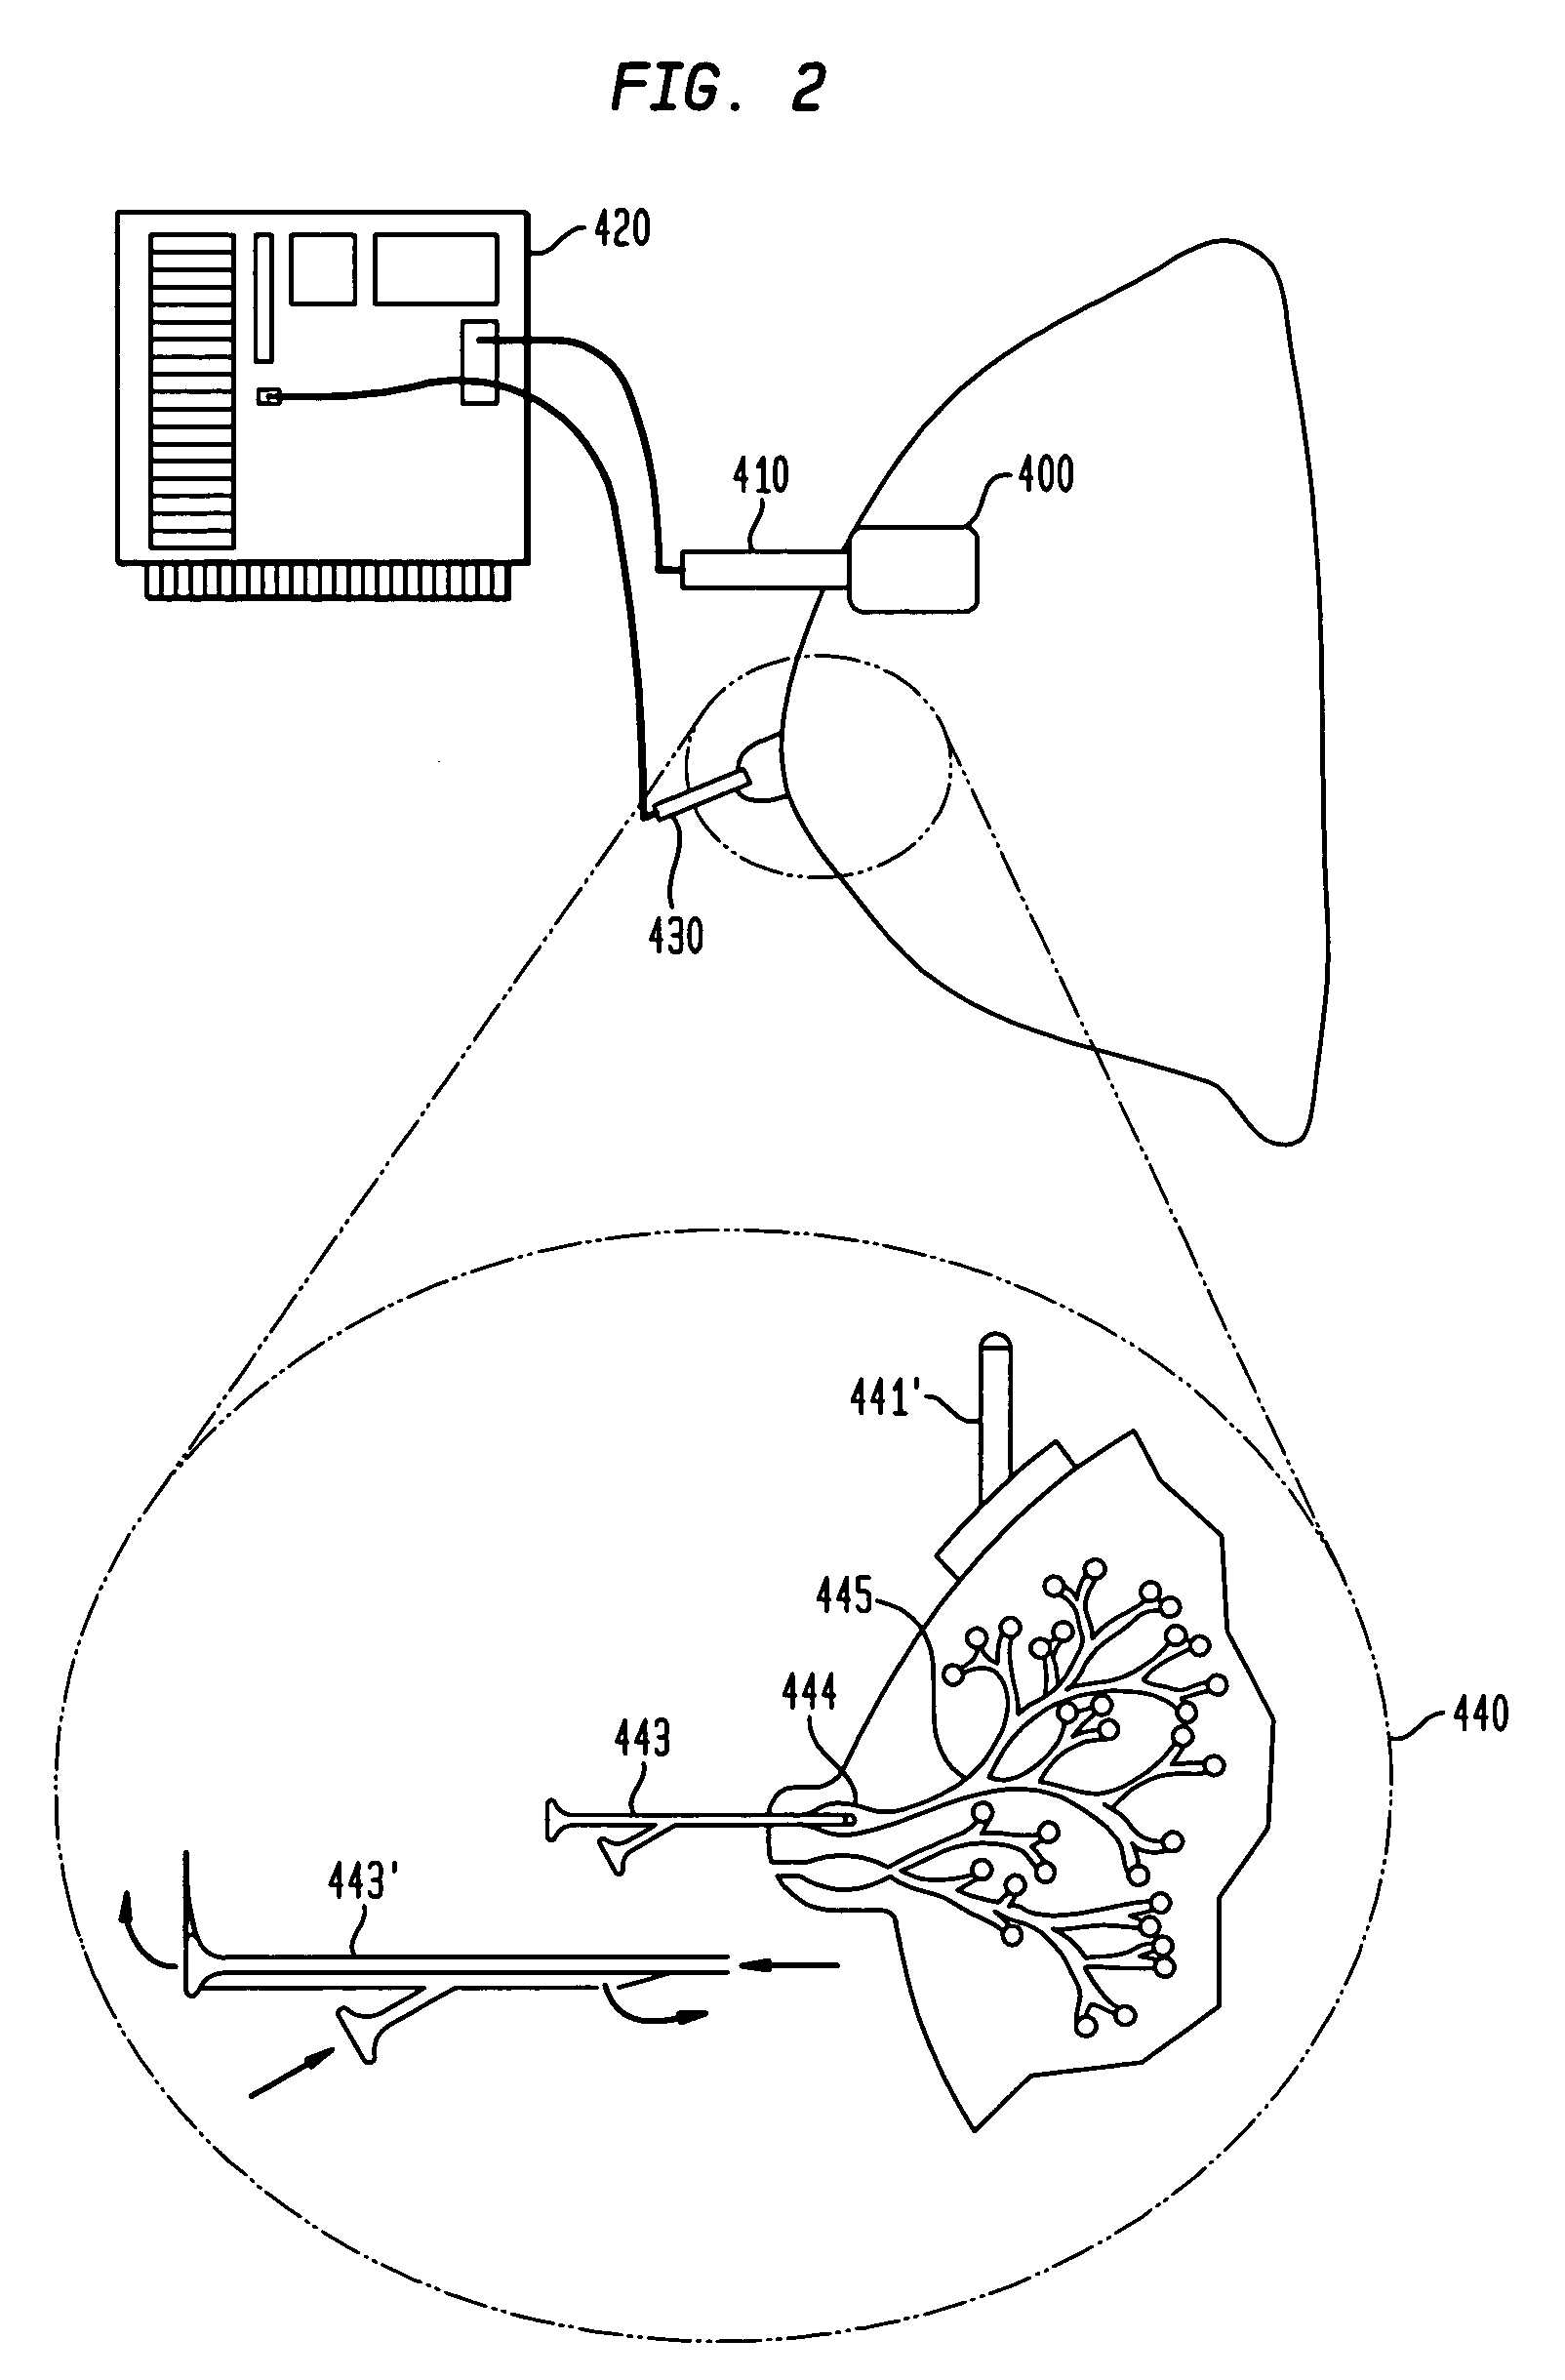 Method and system for detecting electrophysiological changes in pre-cancerous and cancerous breast tissue and epithelium